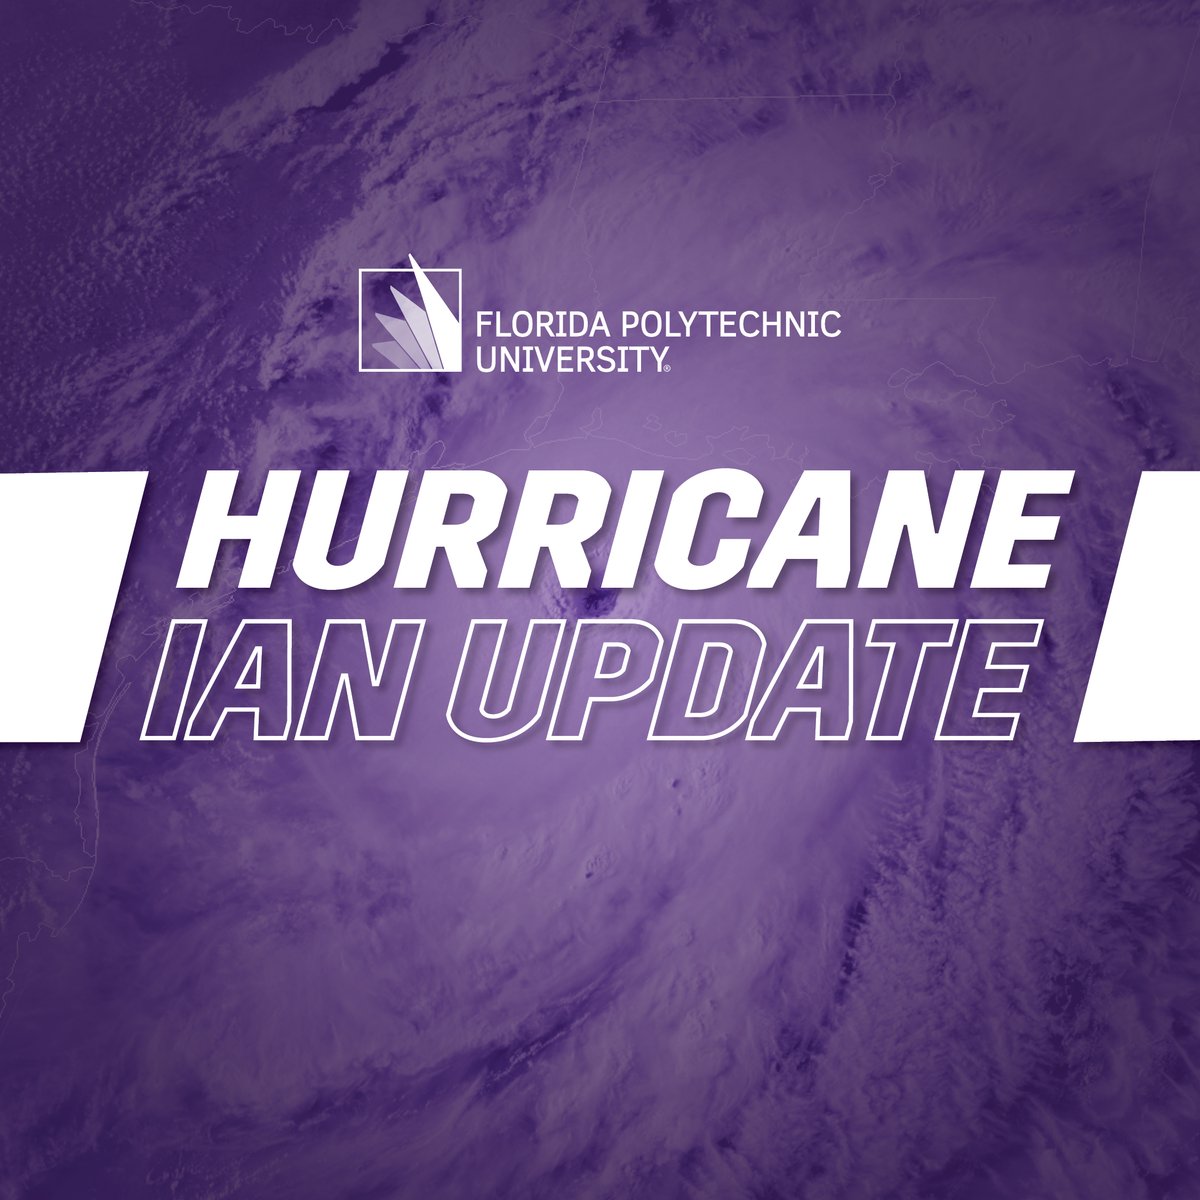 Hurricane Ian Update: 2:40 p.m., 9/27 The Florida Poly emergency management team continues to closely track the approach of Hurricane Ian, and we are in close contact with local and state emergency officials as the storm unfolds. Read more: bit.ly/3LMPLLP